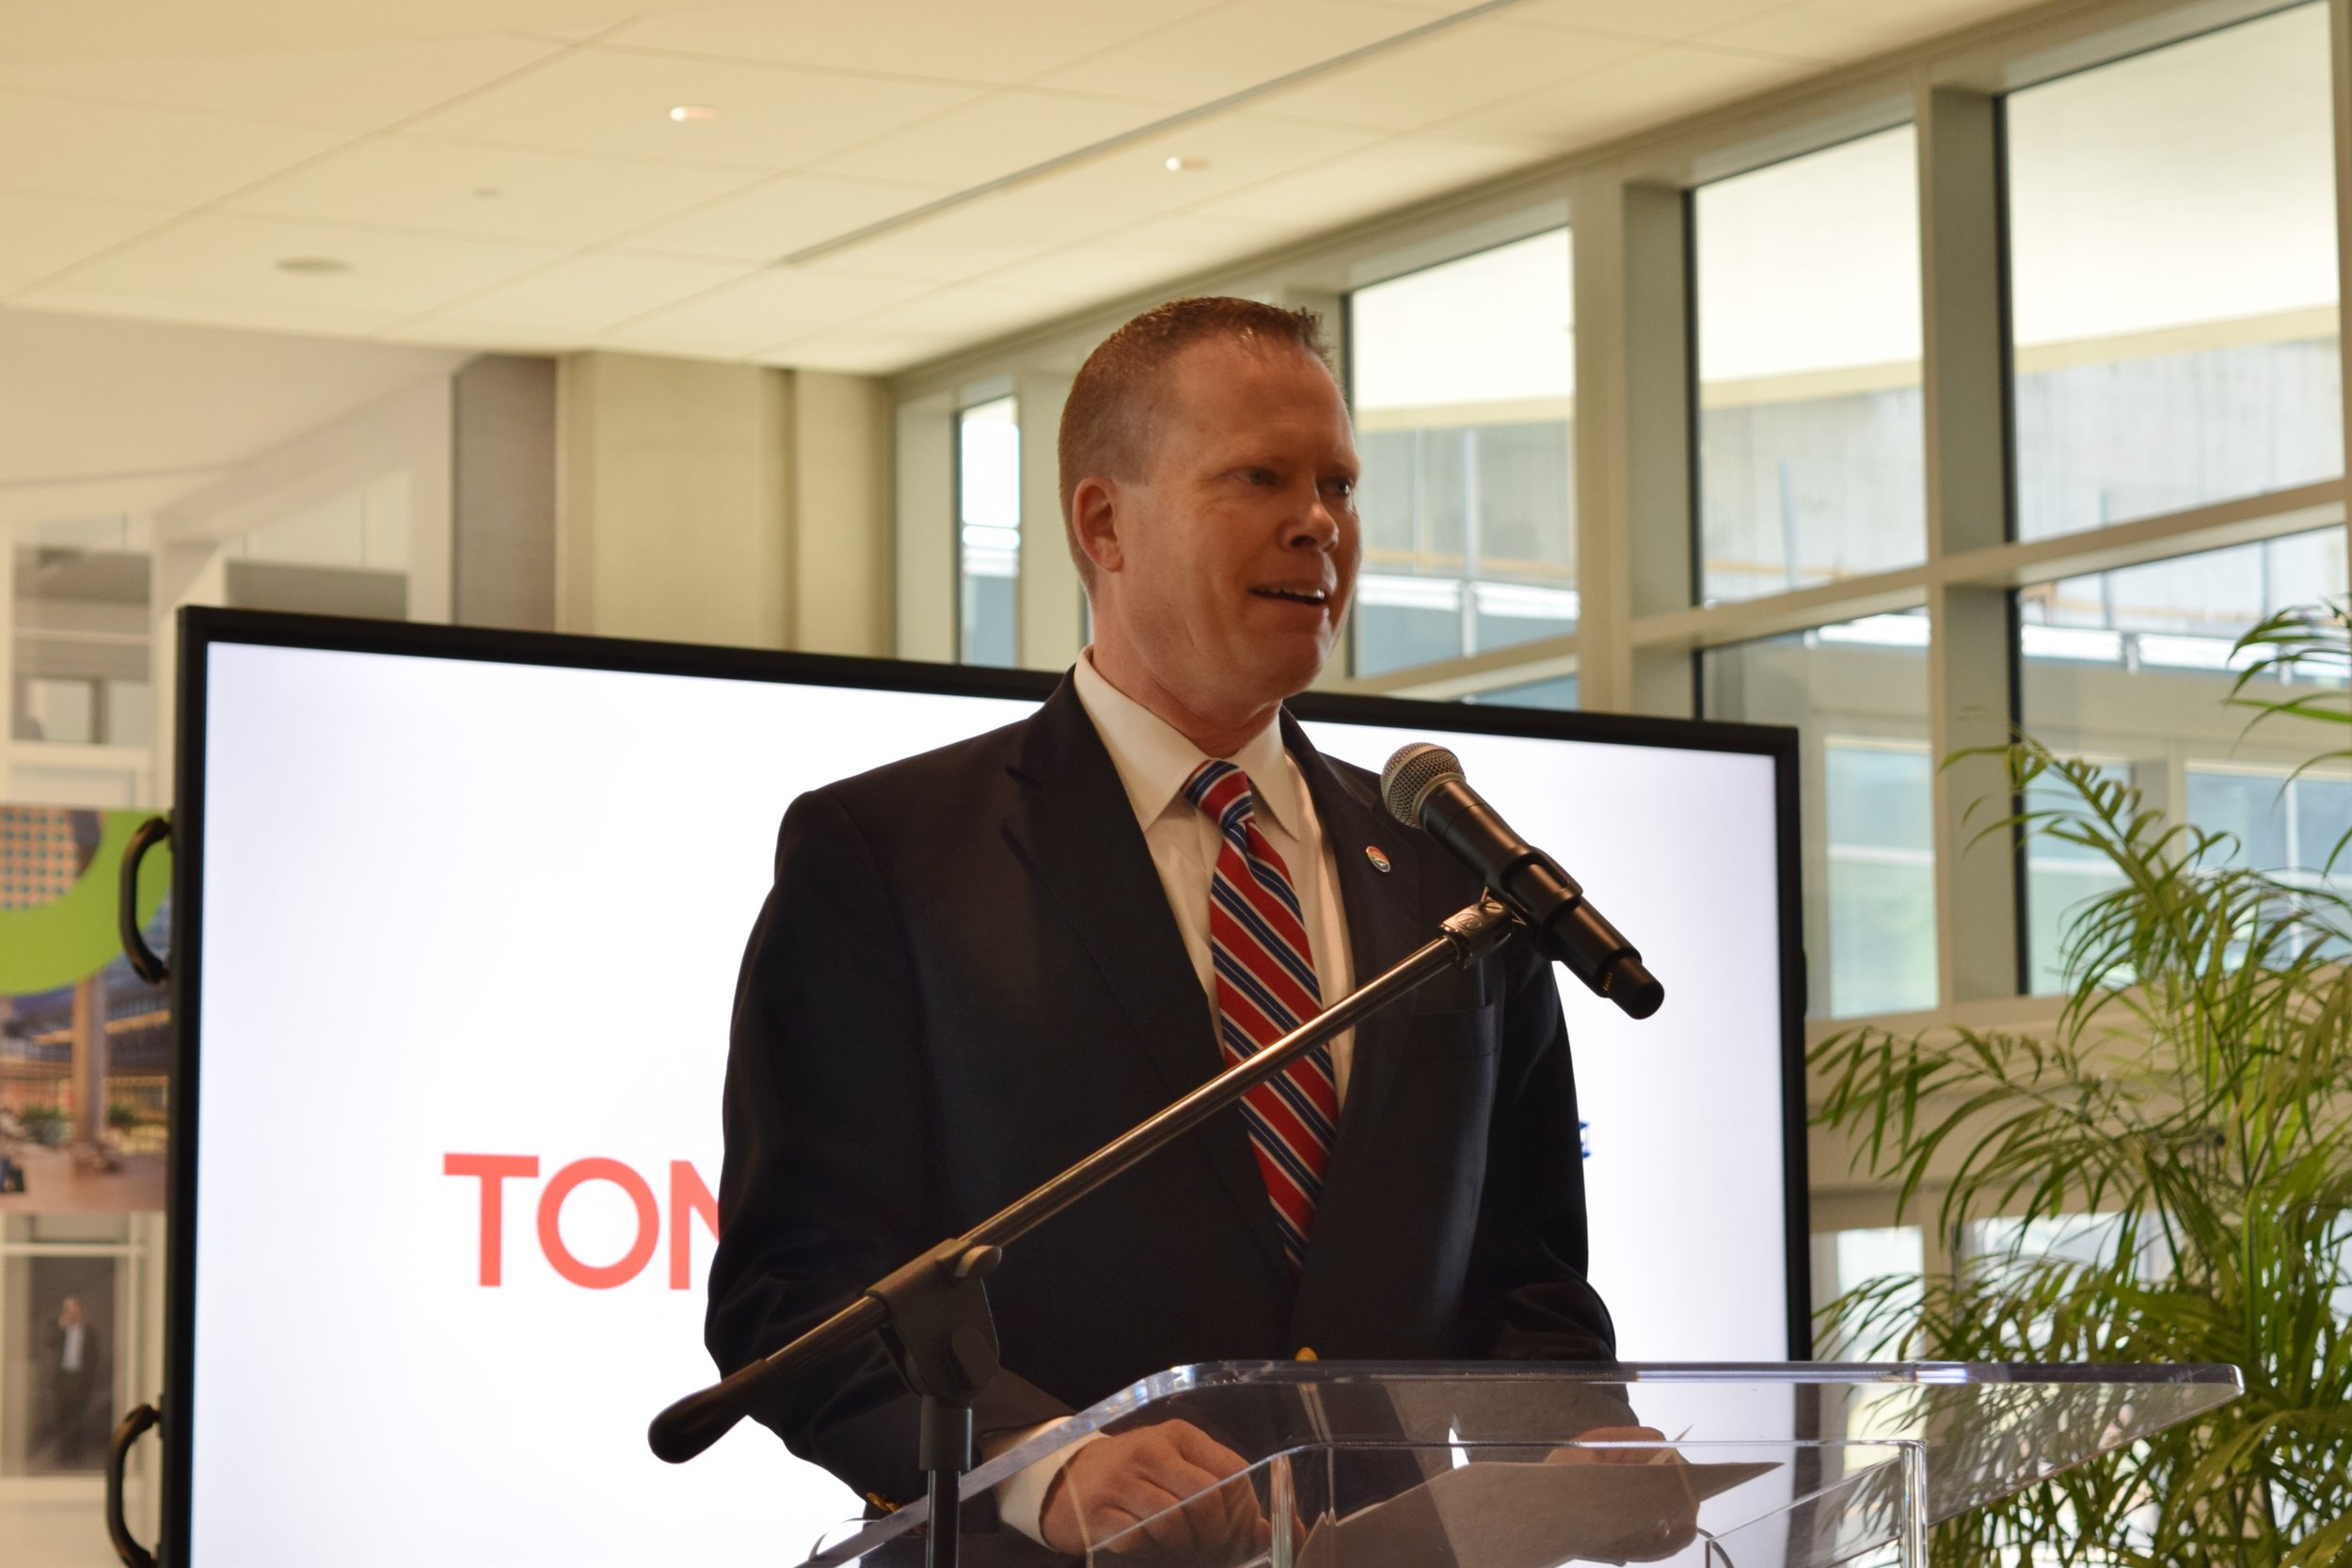 Chris Minner welcoming Press Confeence attendees to Tampa International Airport, 9 May '17.JPG